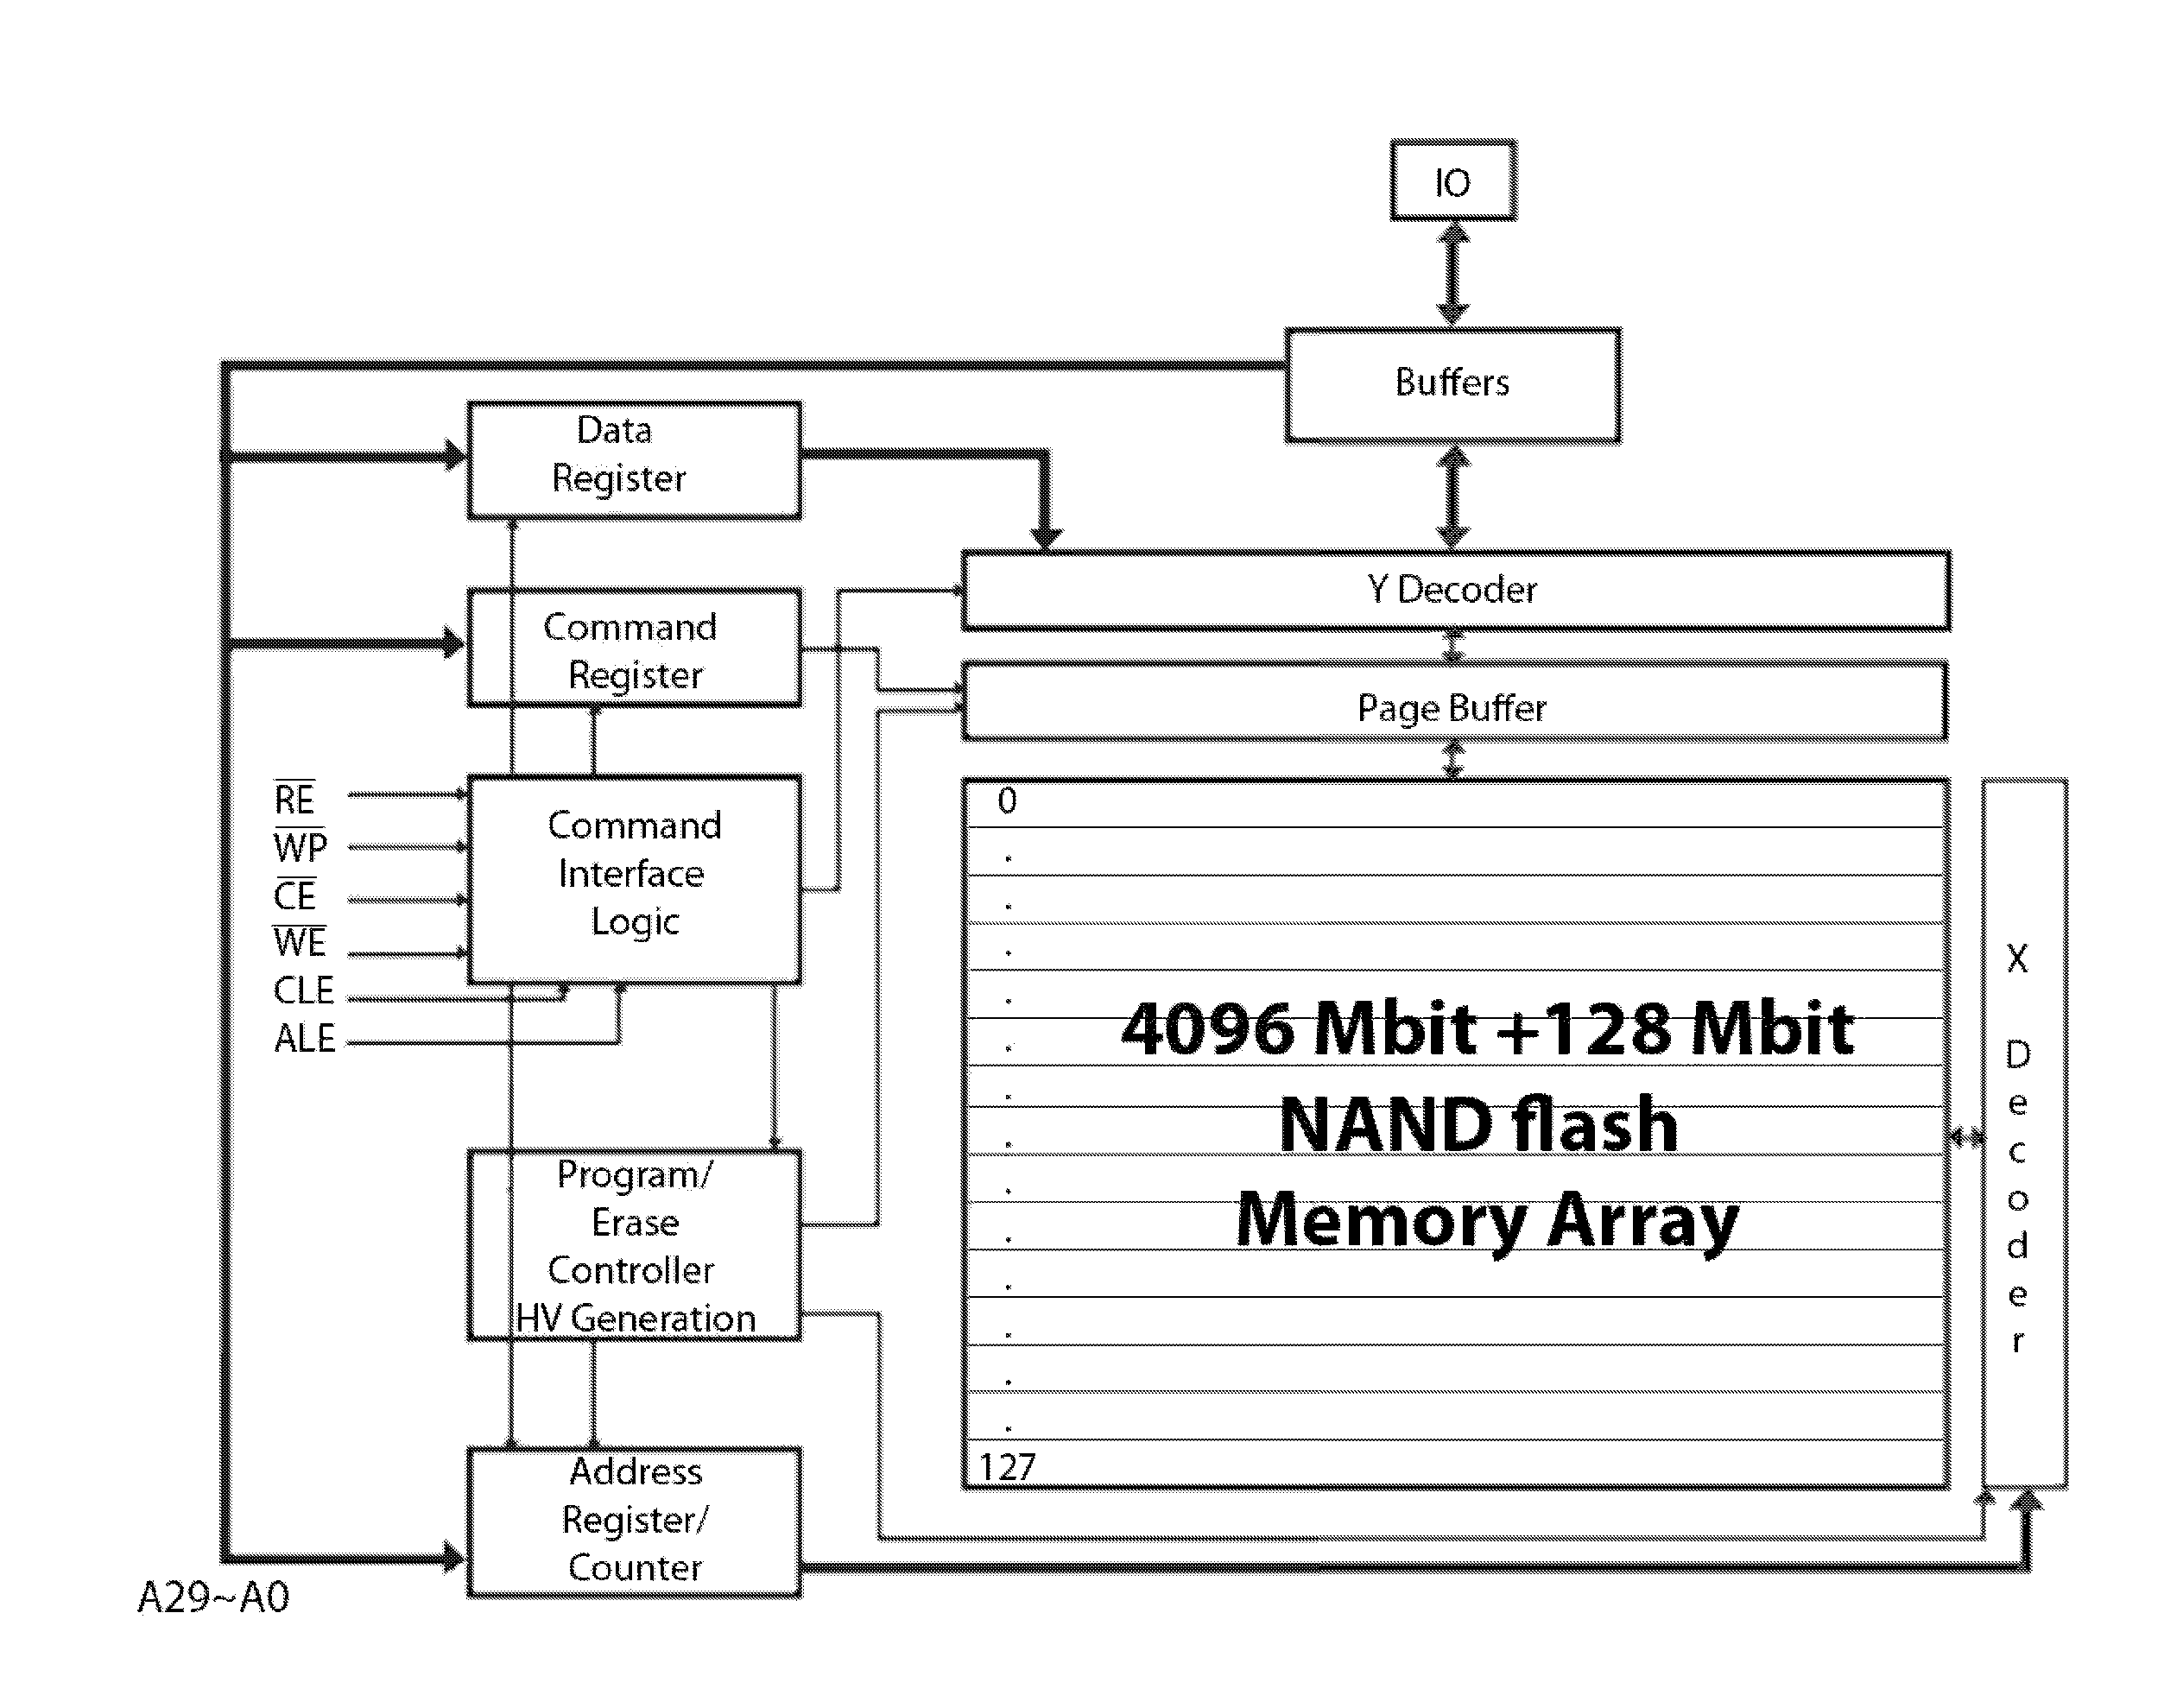 Page-buffer management of non-volatile memory-based mass storage devices